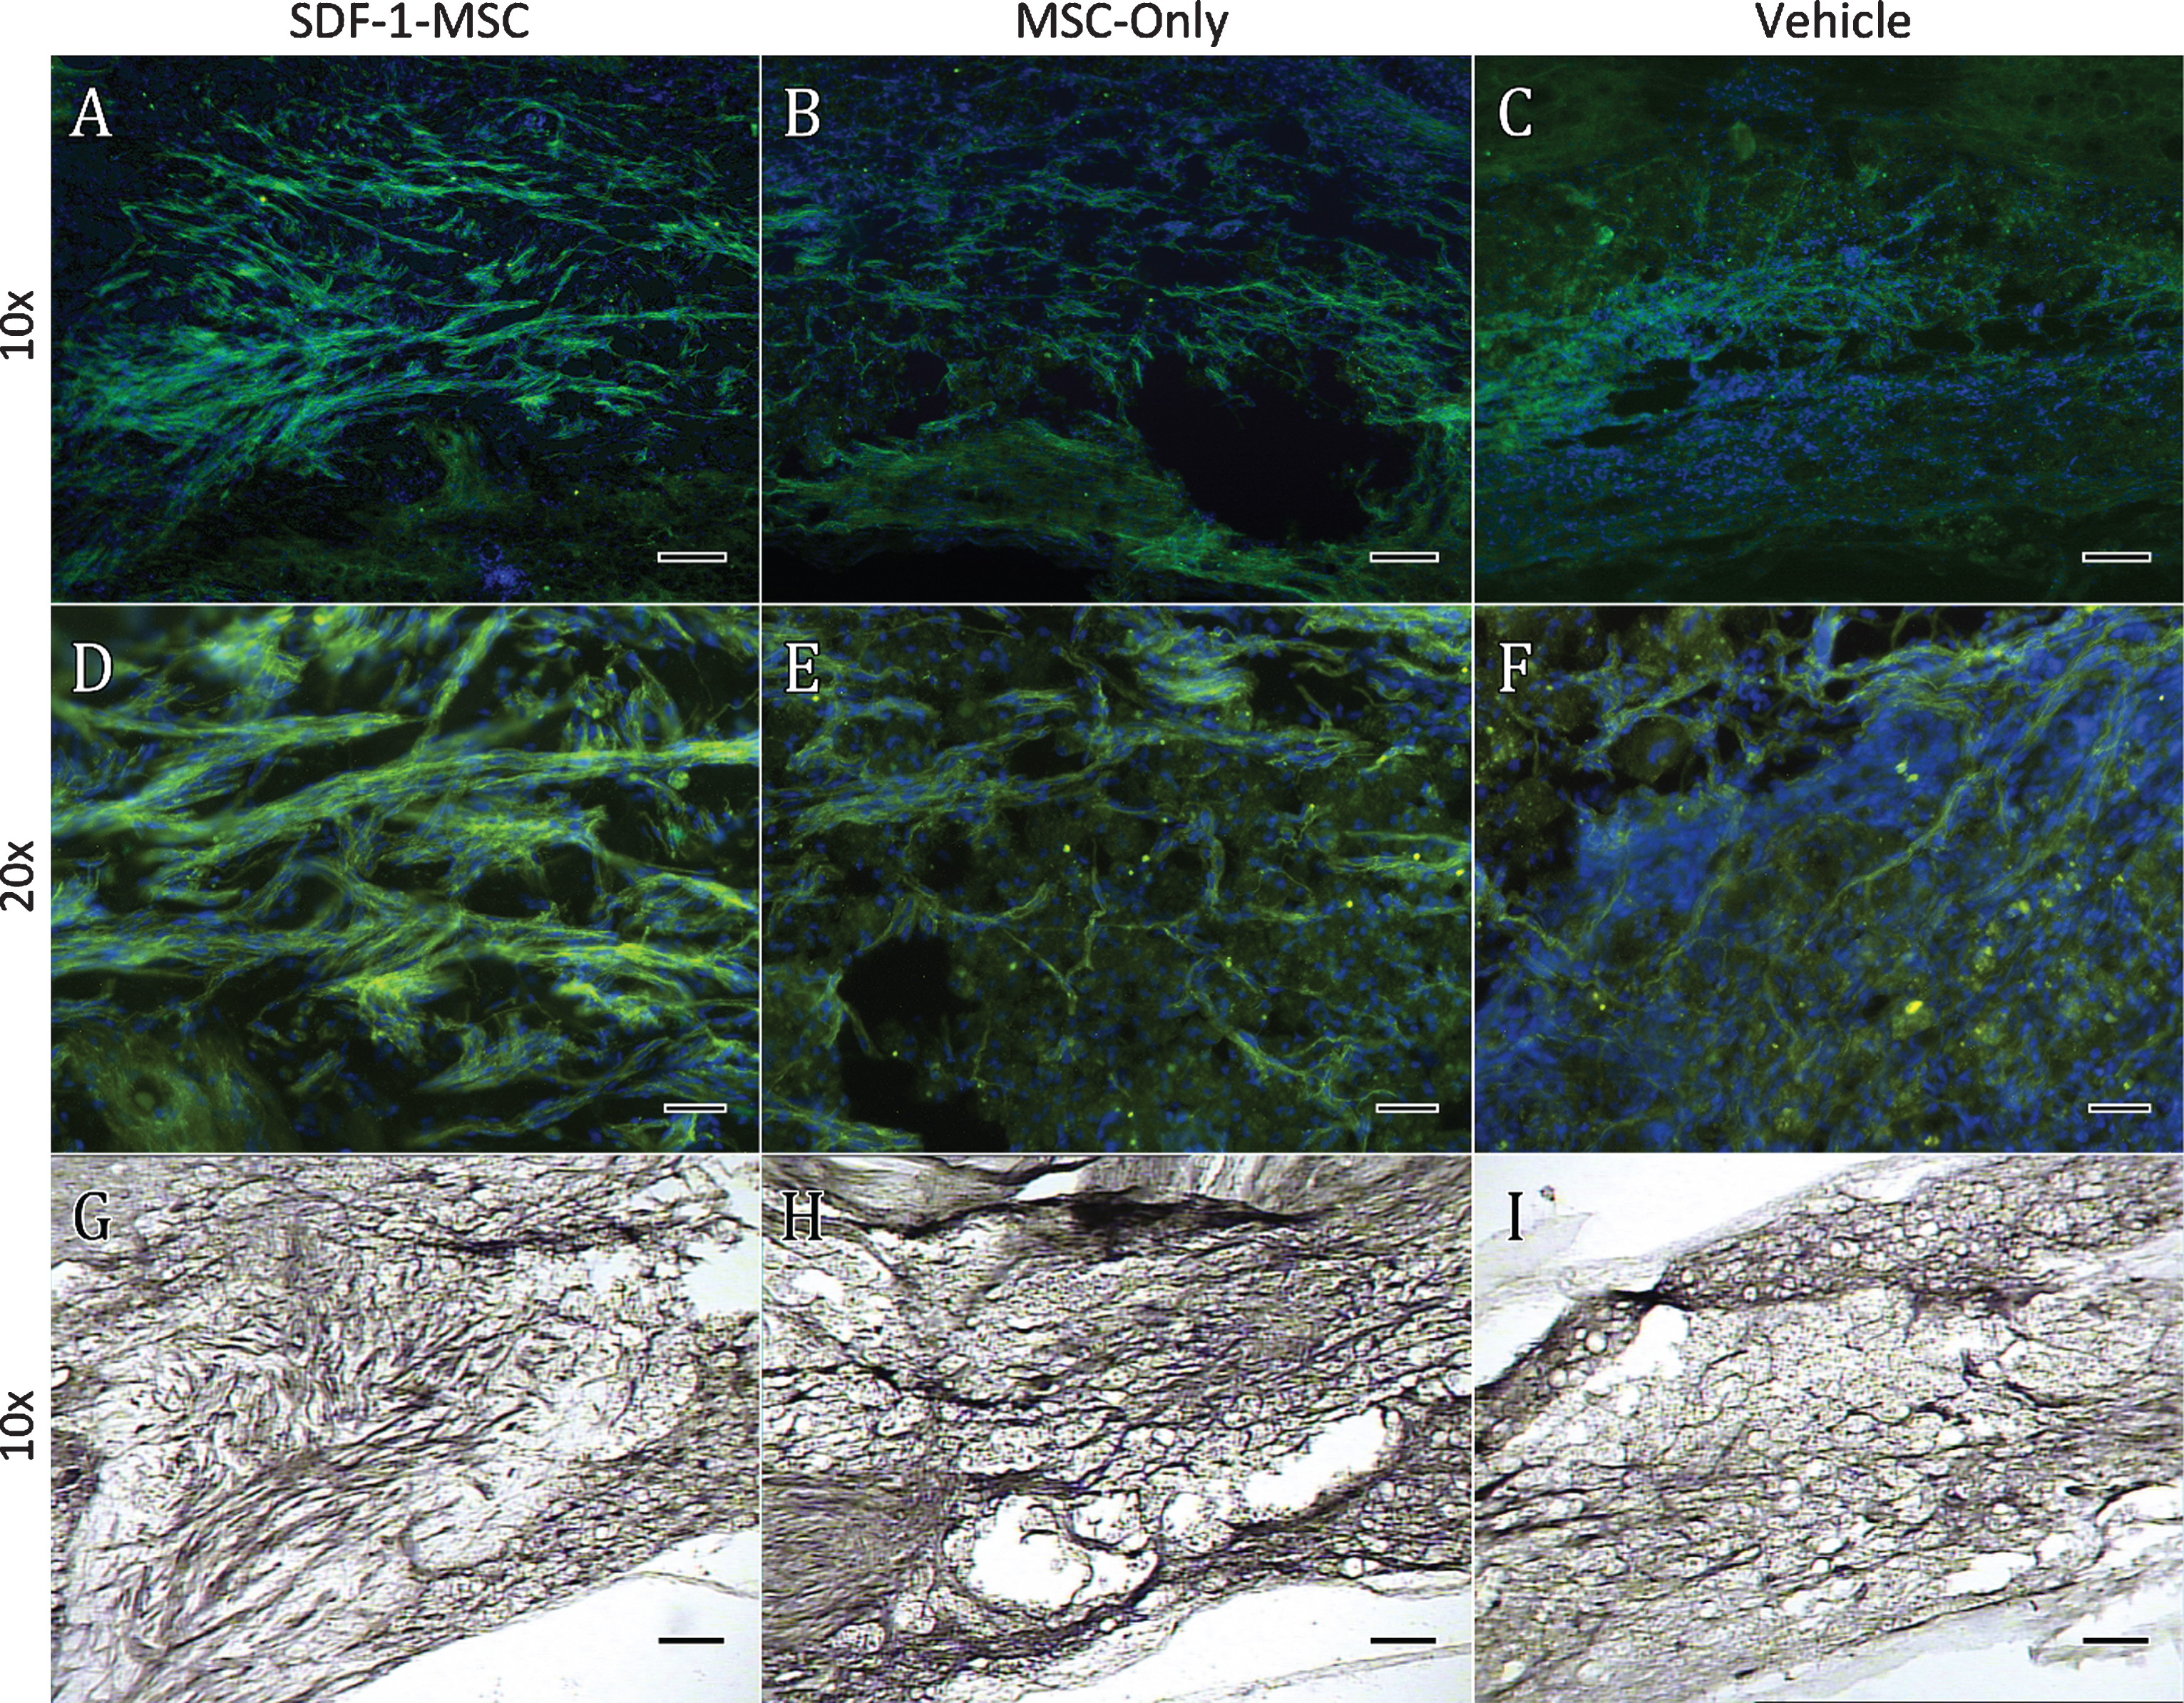 Immunohistochemistry GAP-43. GAP-43 immunological labeling was found to be significantly increased within the lesion cores for SDF-1-MSC-treated (A,D,G), but not in MSC-only rats (B,E,H) compared to vehicle-treated controls (C,F,I). Data was quantified using DAB labeling (G-I) by tracing lesion cores and obtaining optical densitometry measurements using Image J. Fluorescent microscopy was utilized for imaging to confirm the specificity and localization of labeling (A-F). A 10x objective (A-C, G-I) revealed GAP-43 labeling predominately within the lesion center, while images taken with 20x objectives (D-F) revealed individual fibers or fiber bundles. Scale bars represent 100-μm (A-C, G-I) and 50-μm (D-E).